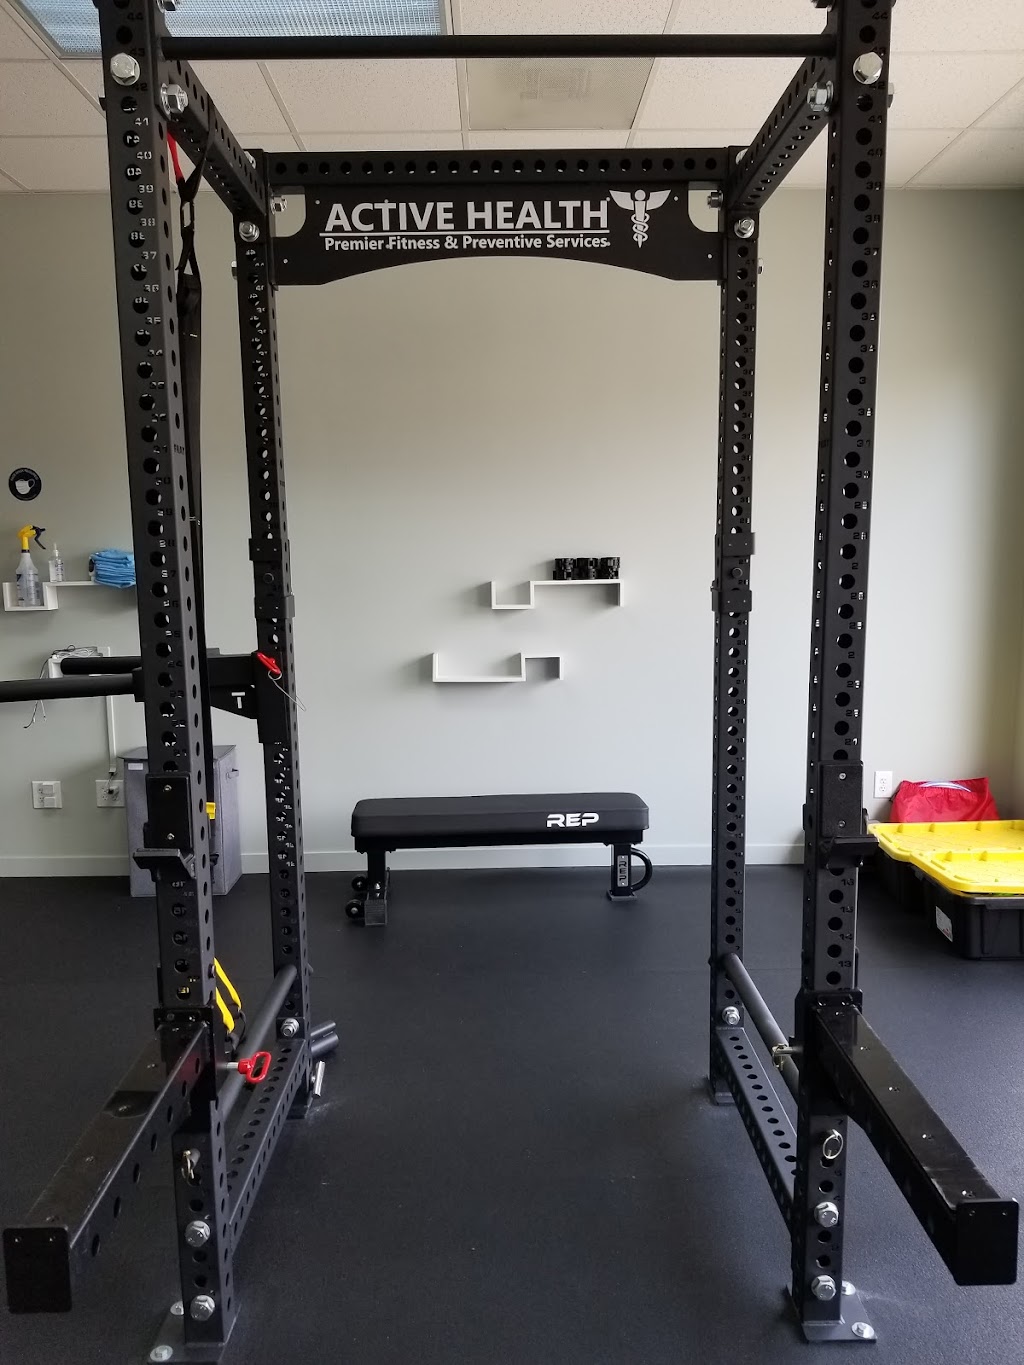 Active Health: Personal Training, Health Coaching, Primary Care | 39 Park Lane Rd #1, New Milford, CT 06776 | Phone: (860) 868-7318